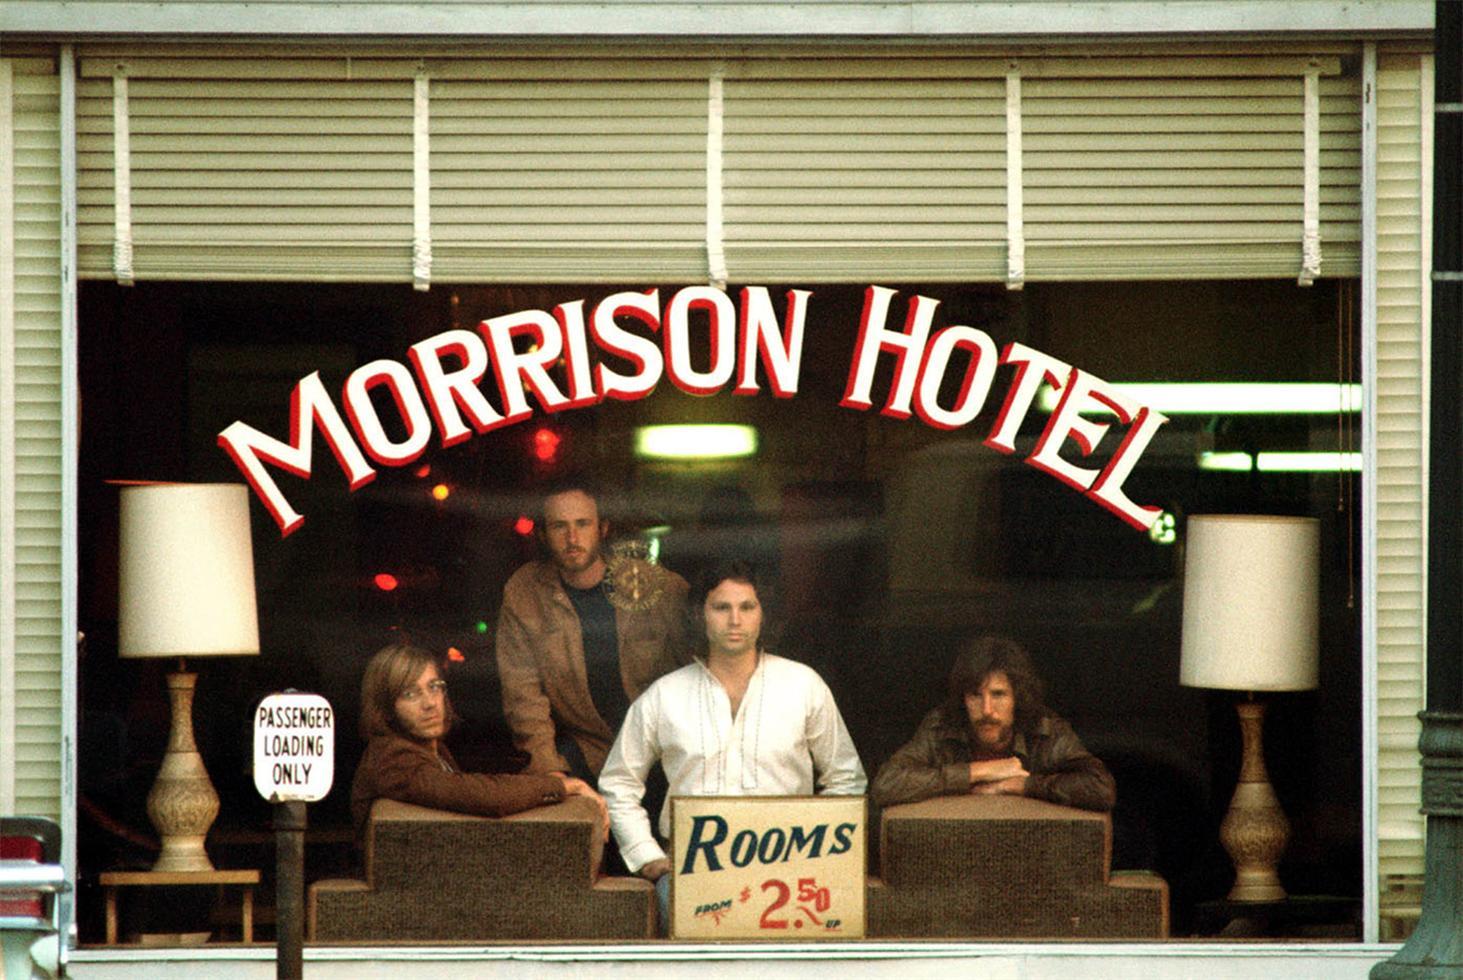 Henry Diltz Color Photograph - The Doors, "Morrison Hotel" 50th Anniversary, Los Angeles, CA, 1969